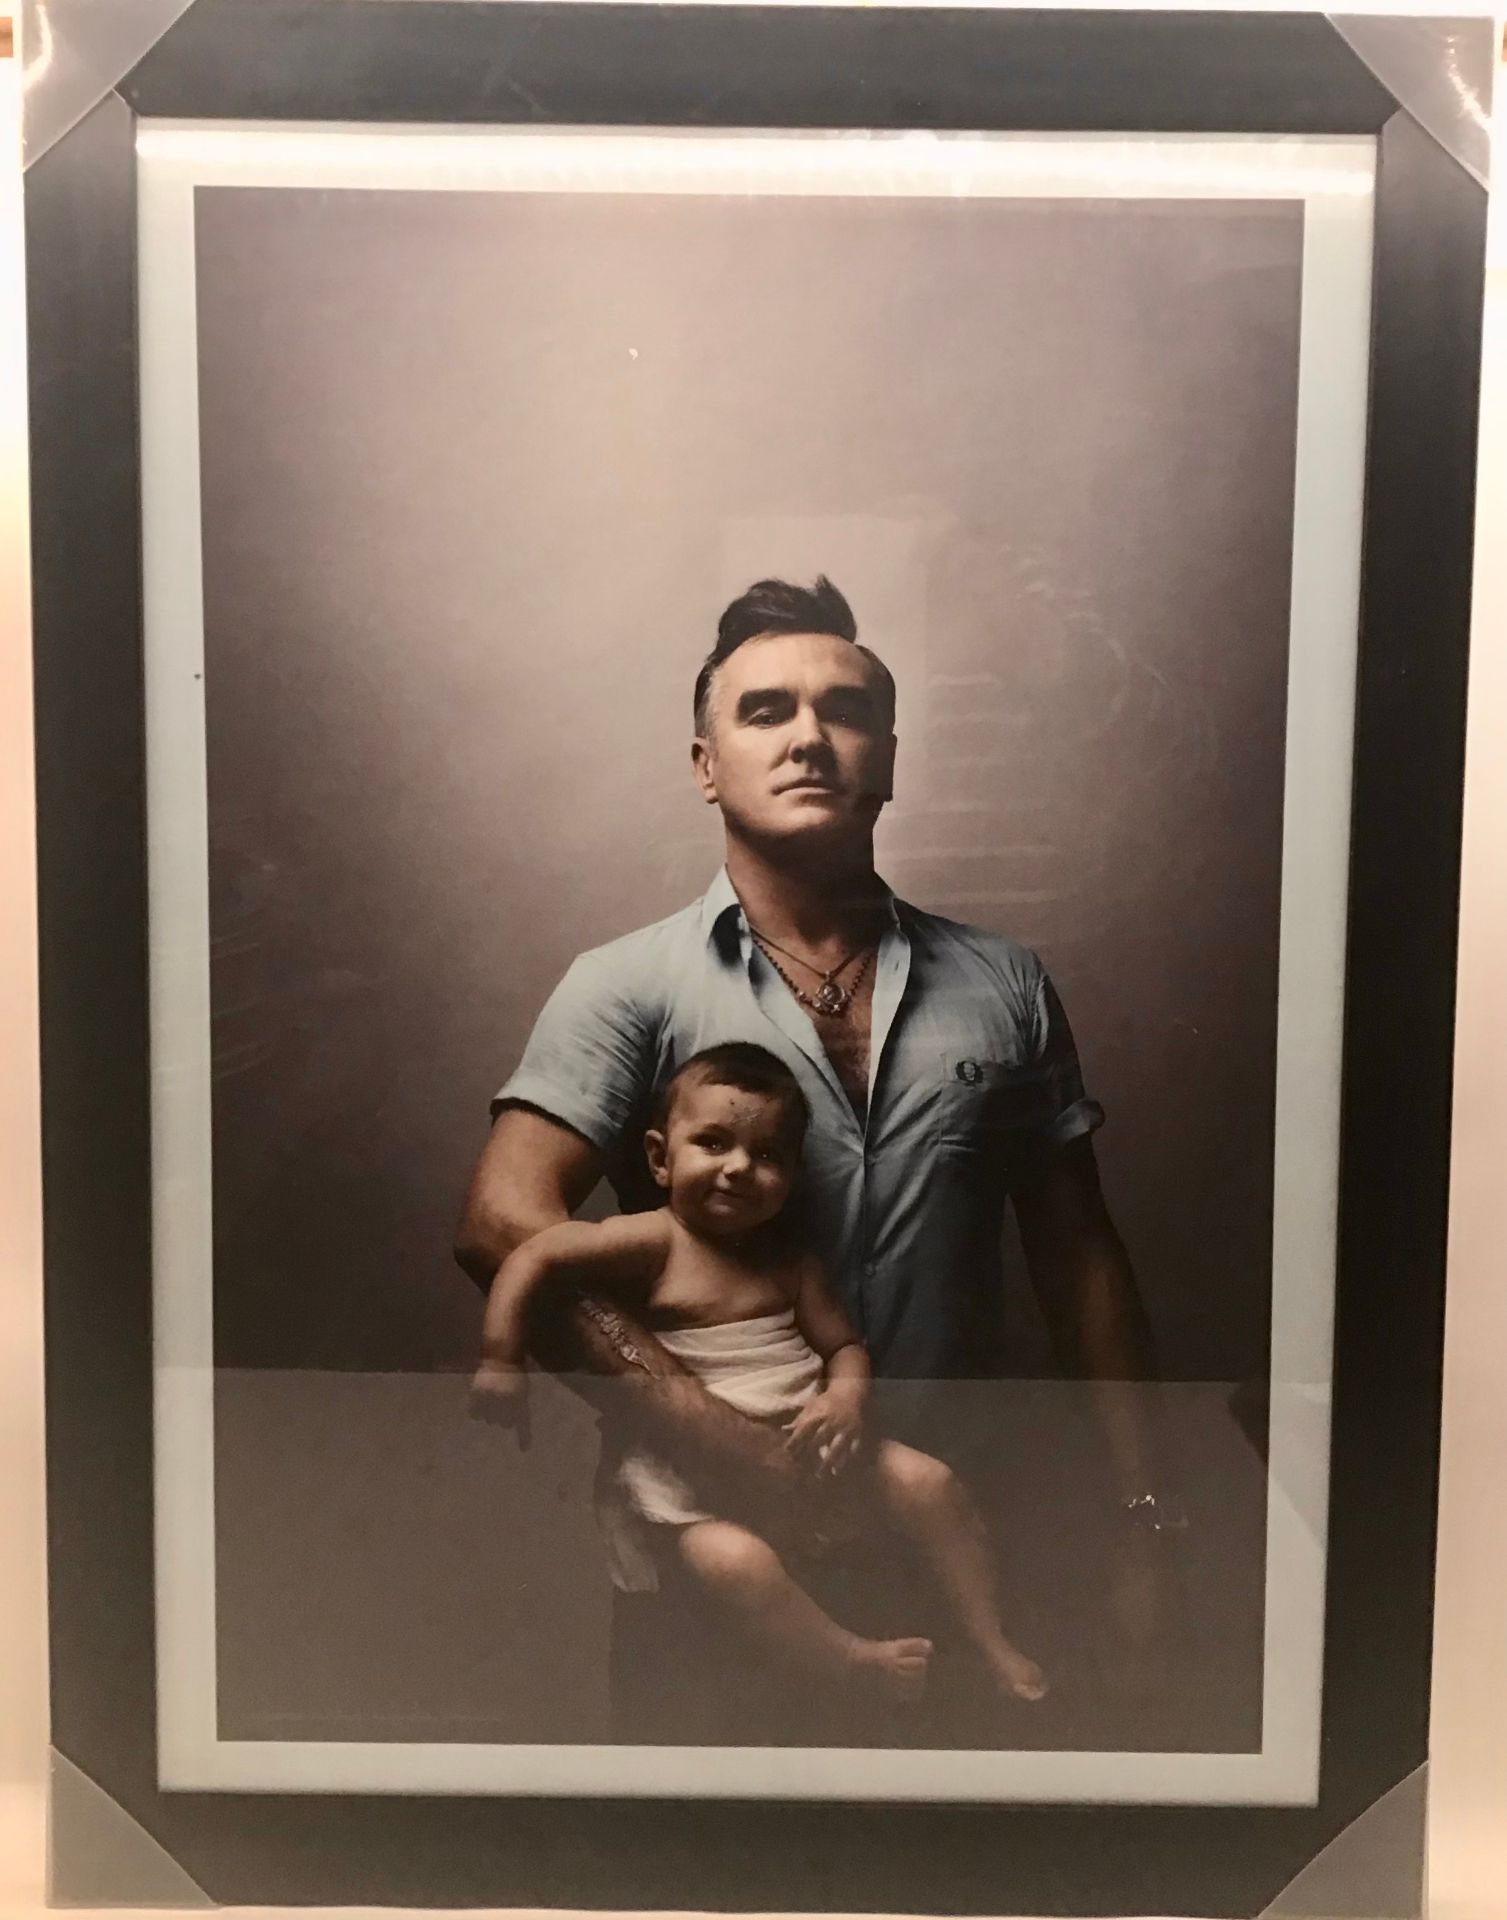 MORRISSEY WITH BABY POSTER. From the album cover ‘Years Of Refusal’ this framed poster measures 57 x